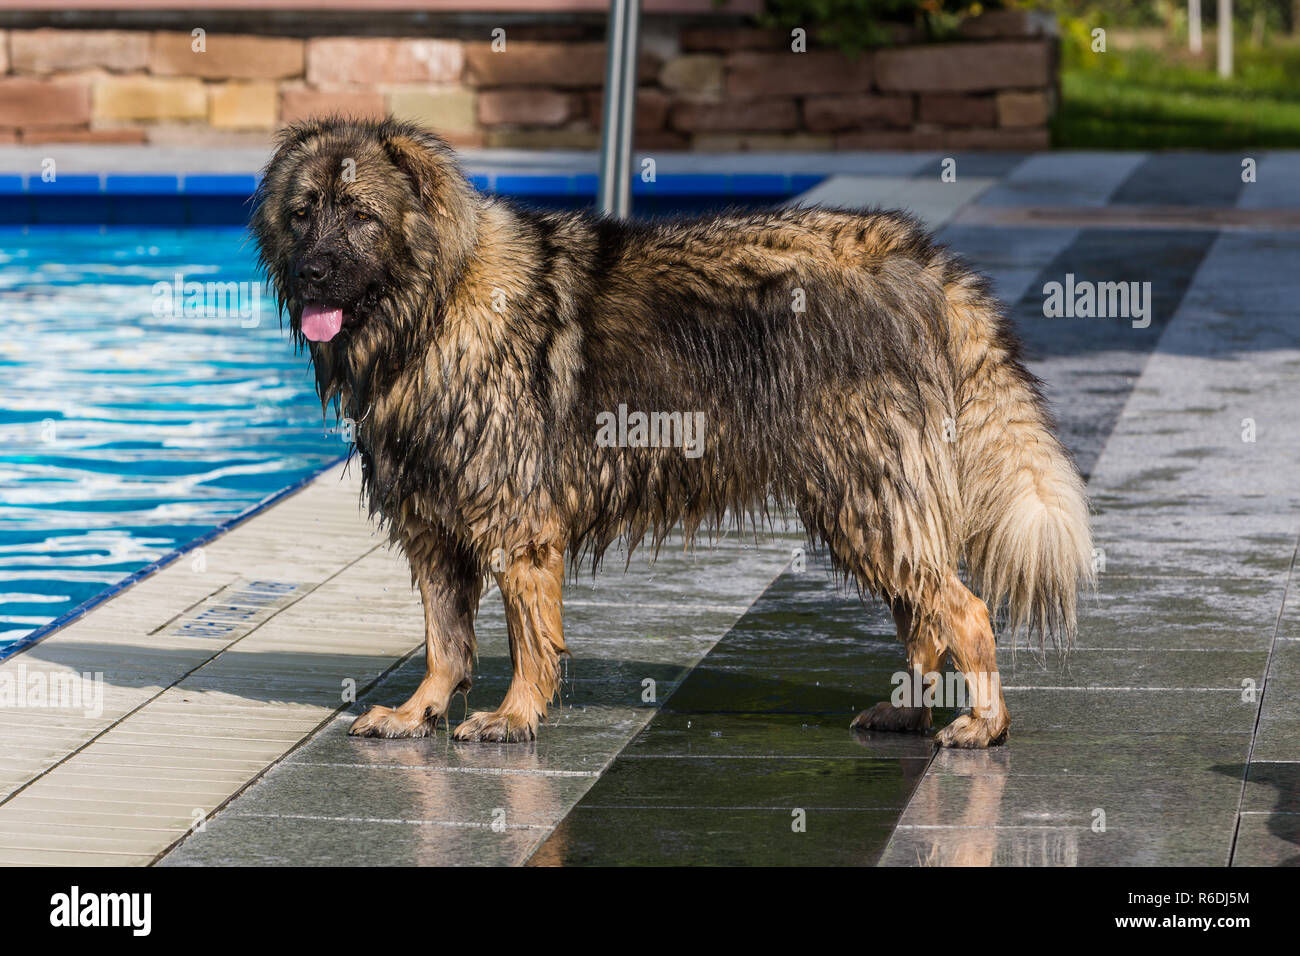 Leonberger Hund High Resolution Stock Photography and Images - Alamy